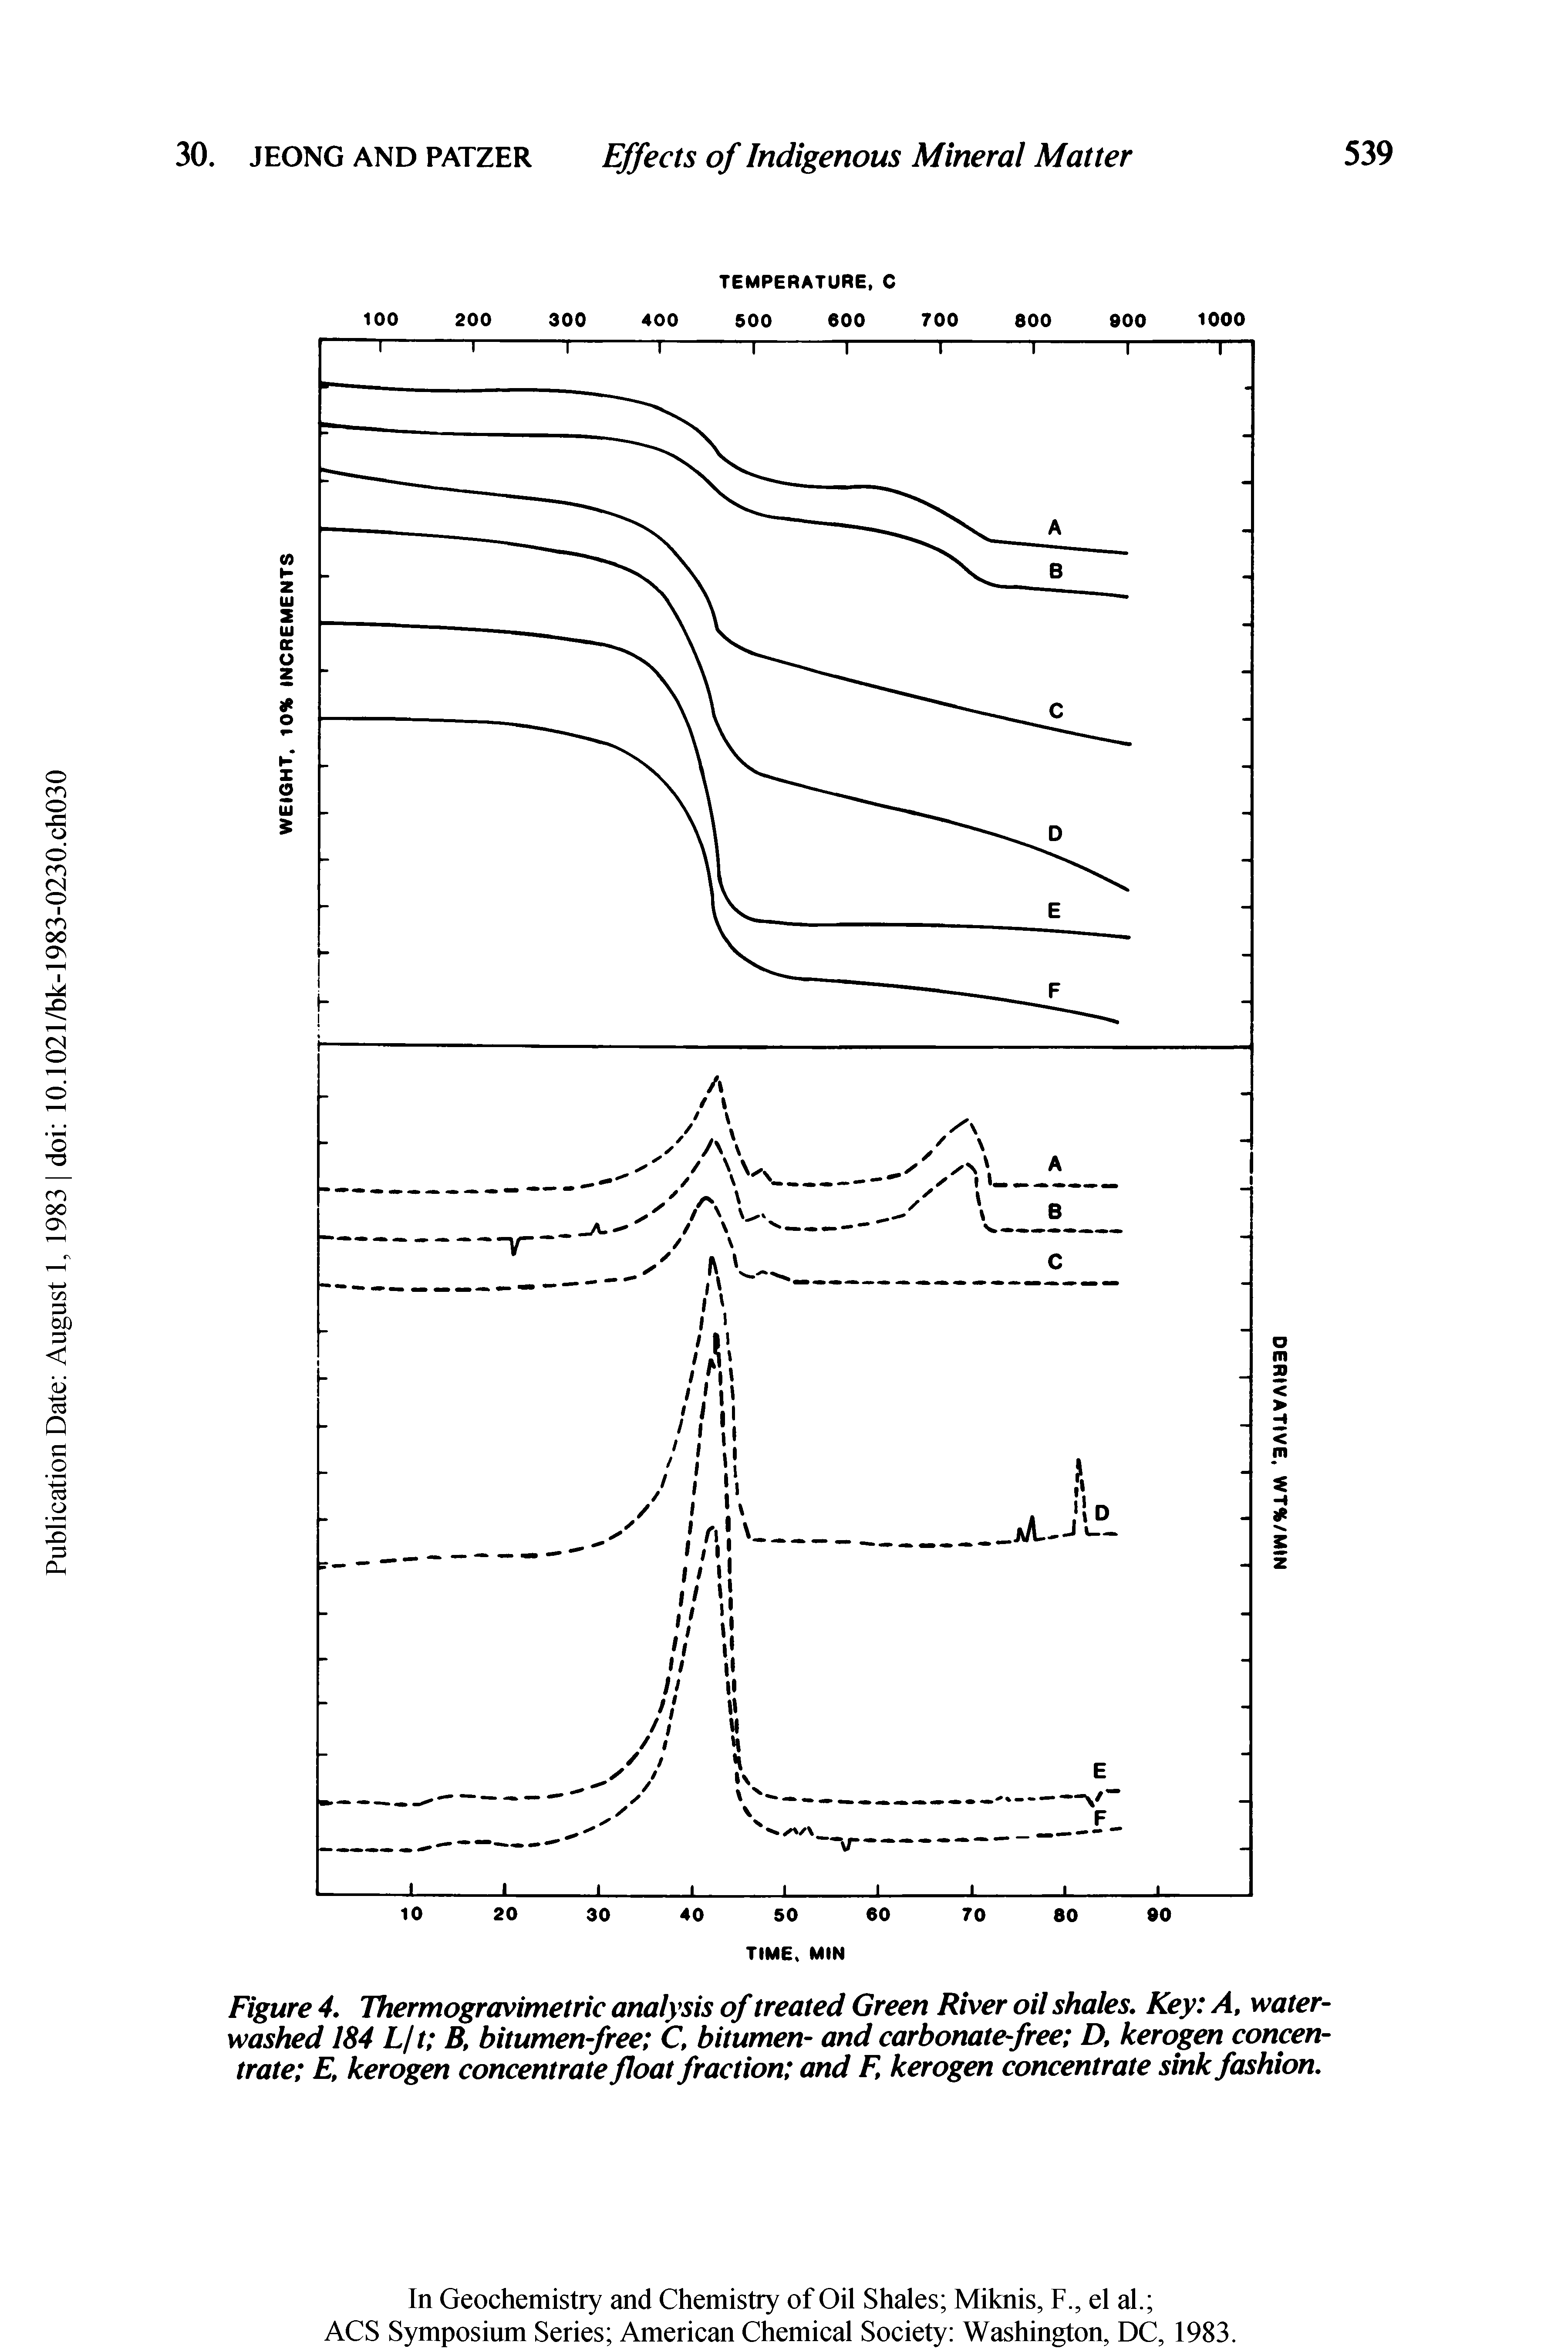 Figure 4. Thermogravimetric analysis of treated Green River oil shales. Key A, water-washed 184 L/1 B, bitumen free C, bitumen- and carbonate-free D, kerogen concentrate E, kerogen concentrate float fraction and F, kerogen concentrate sink fashion.